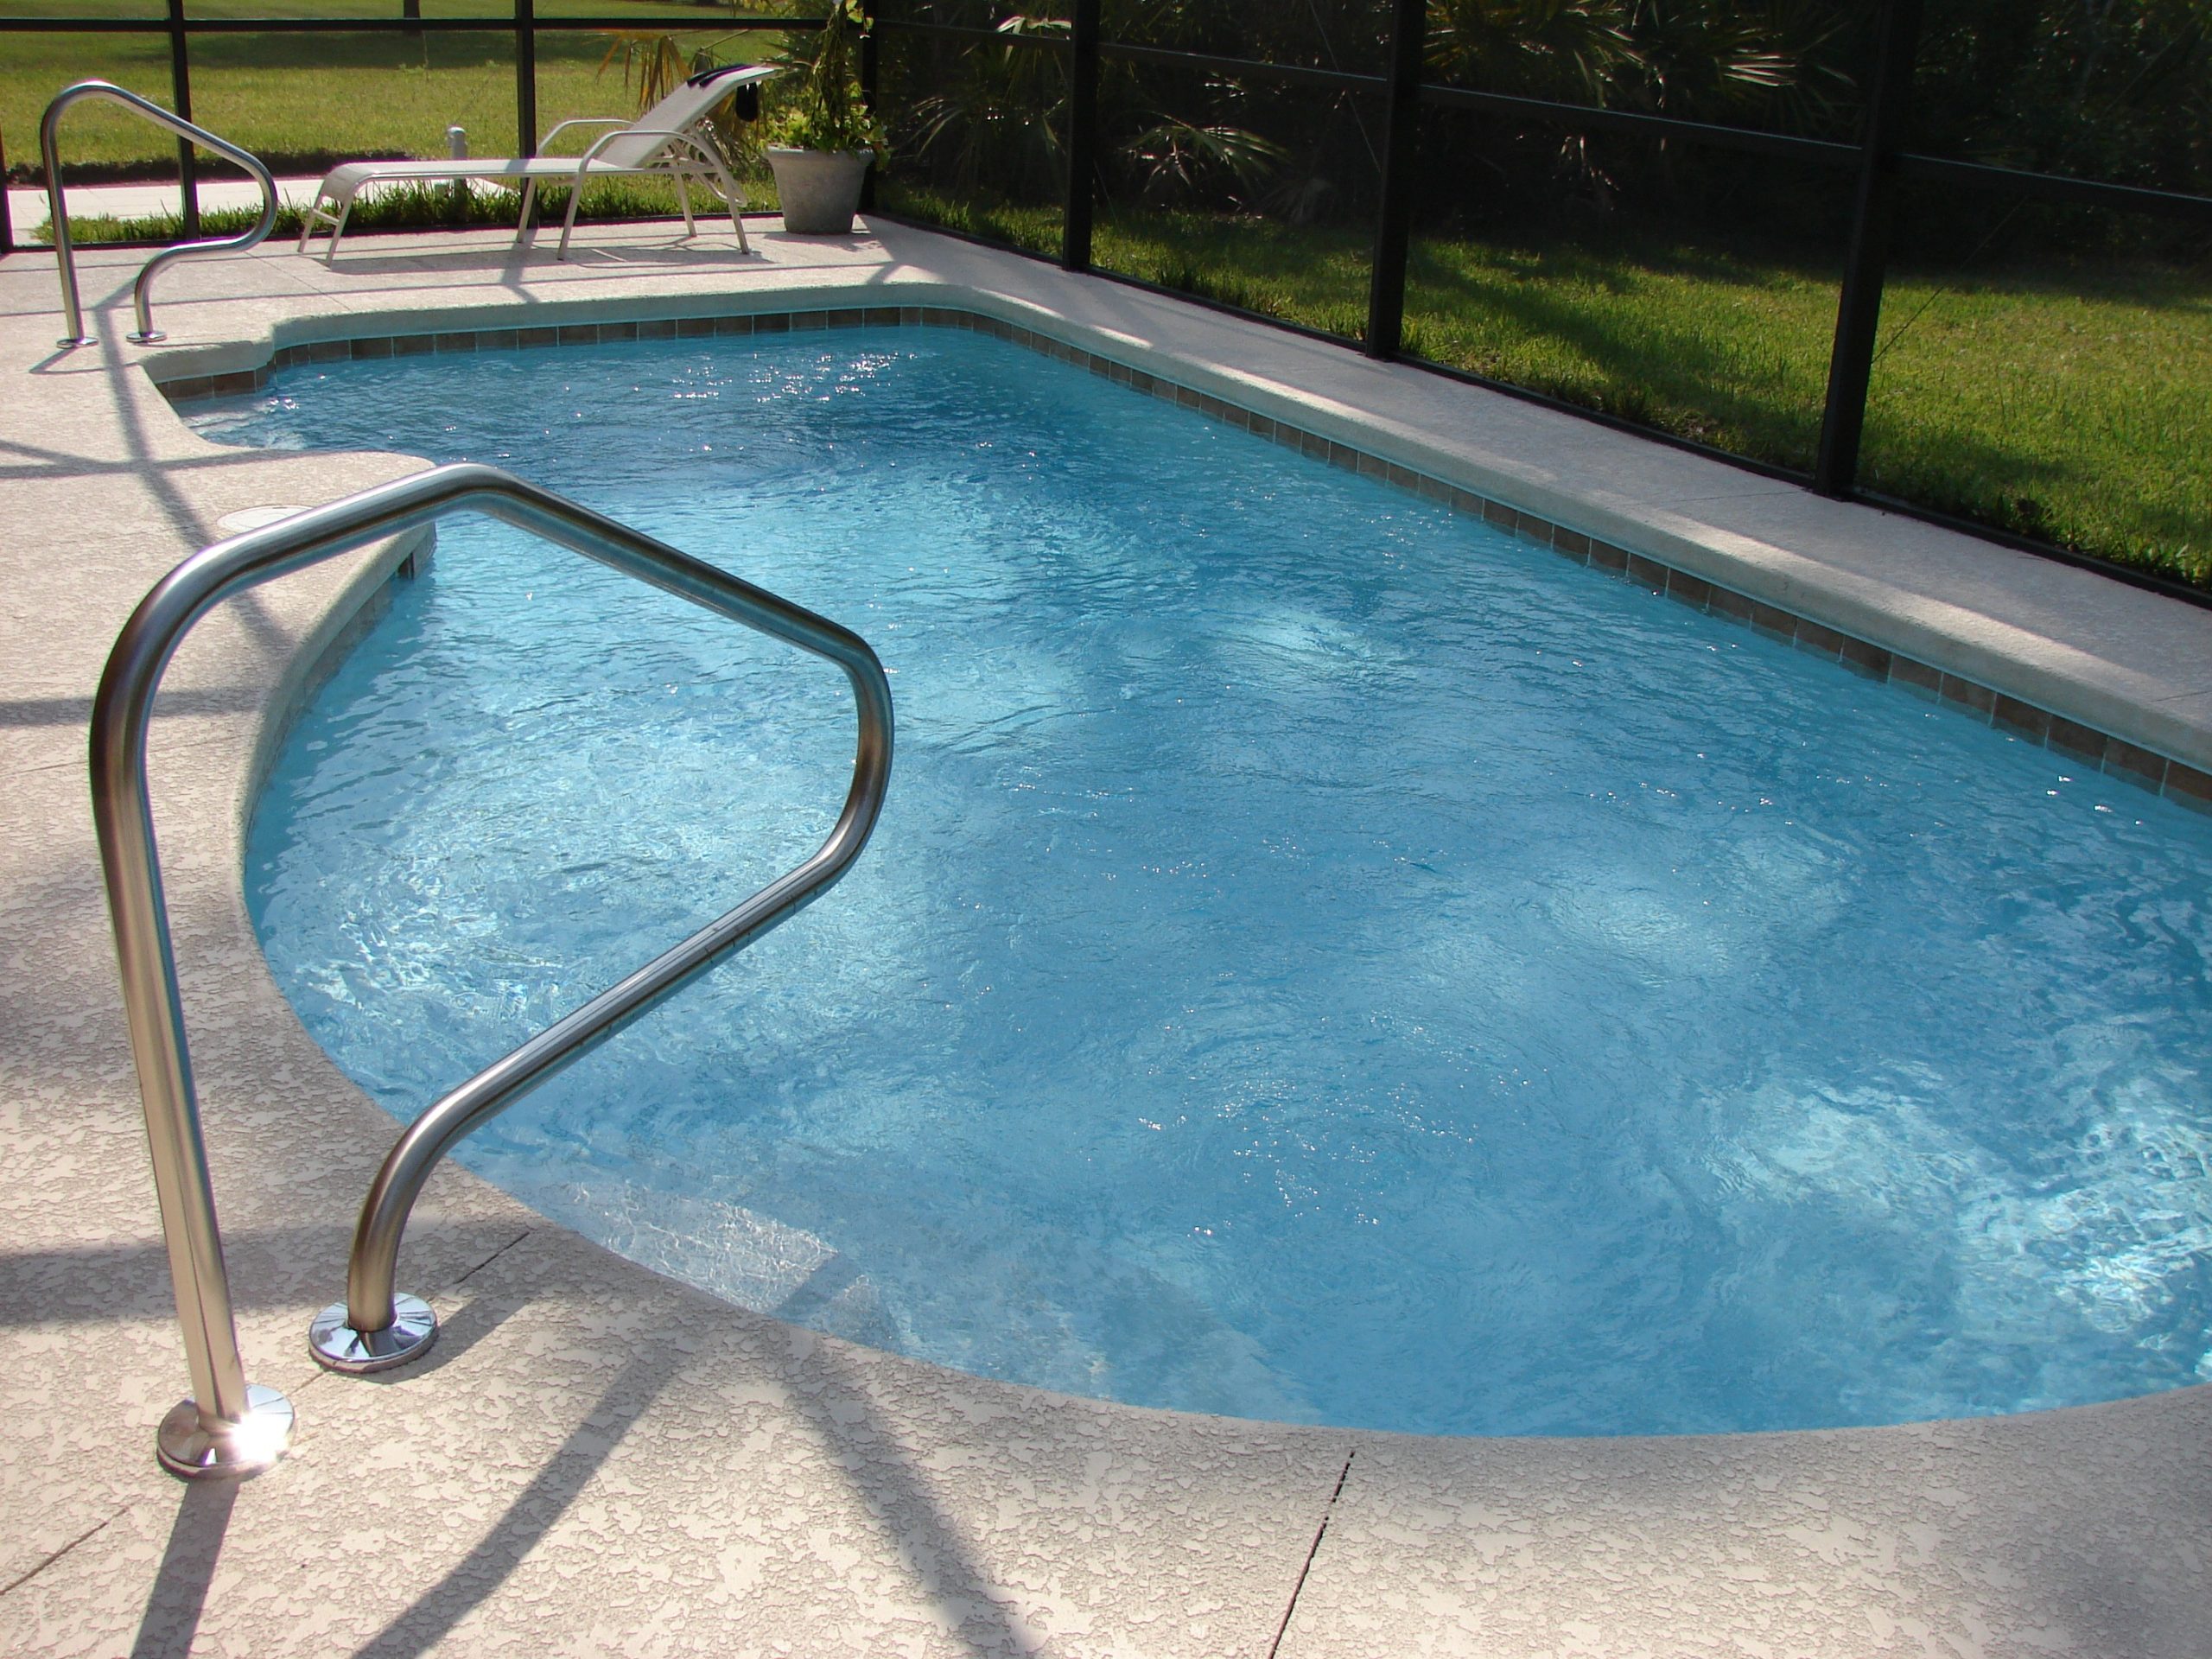 How to Monitor the Cleanliness of Your Pool Water